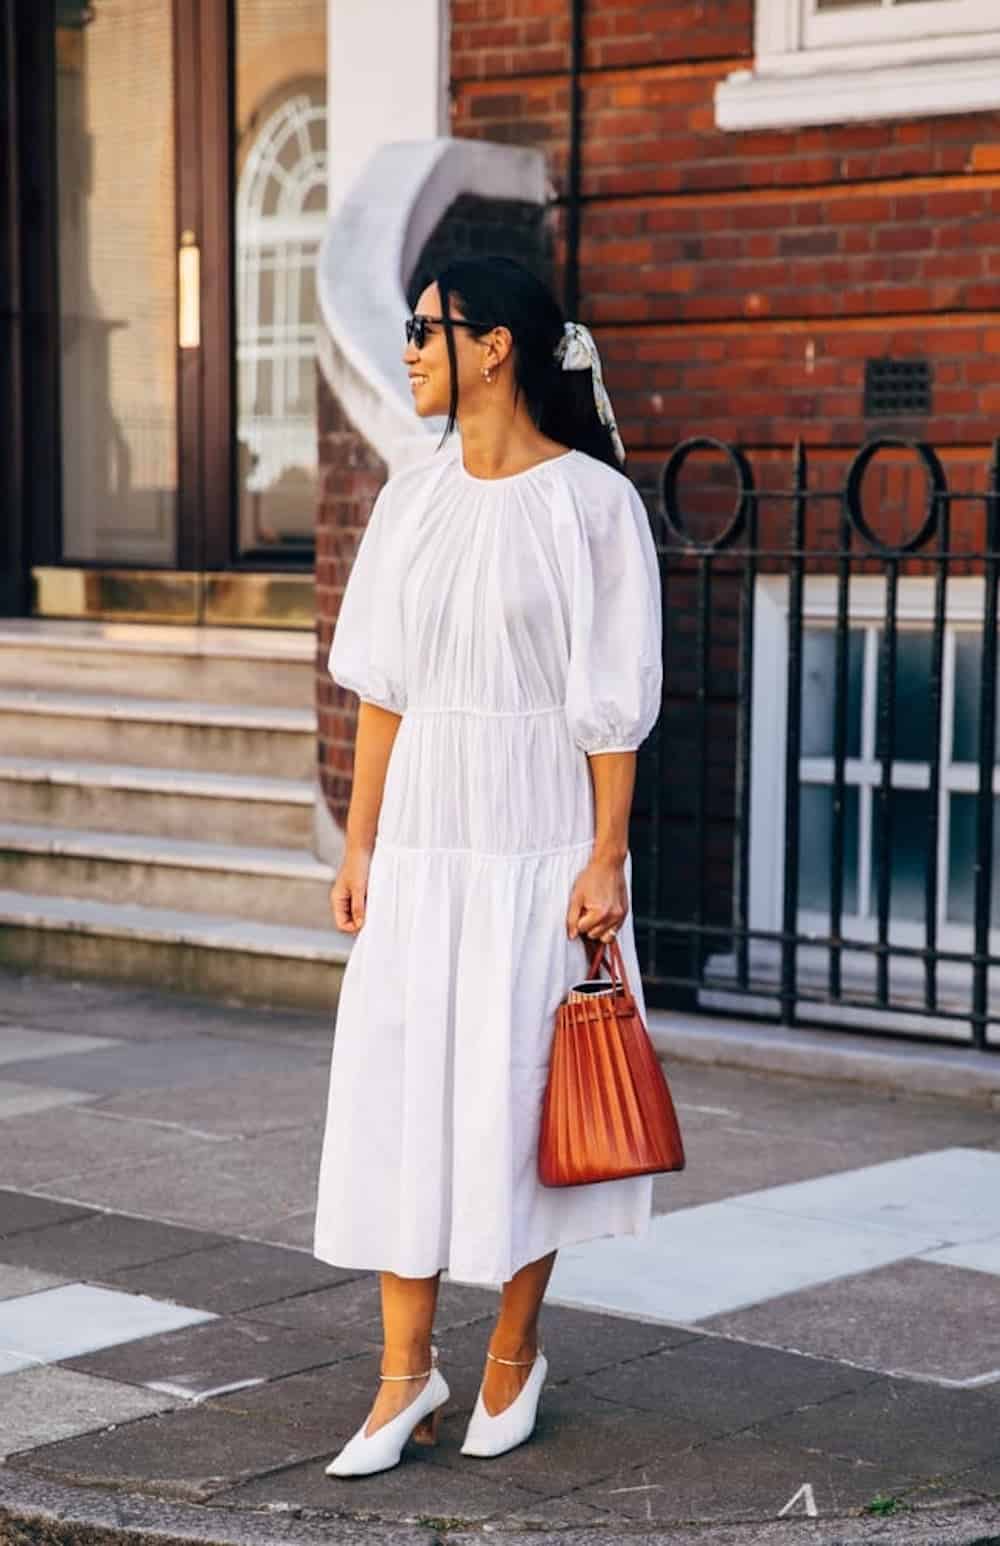 The Best Shoes To Wear With A Long Dress for Any Occasion!